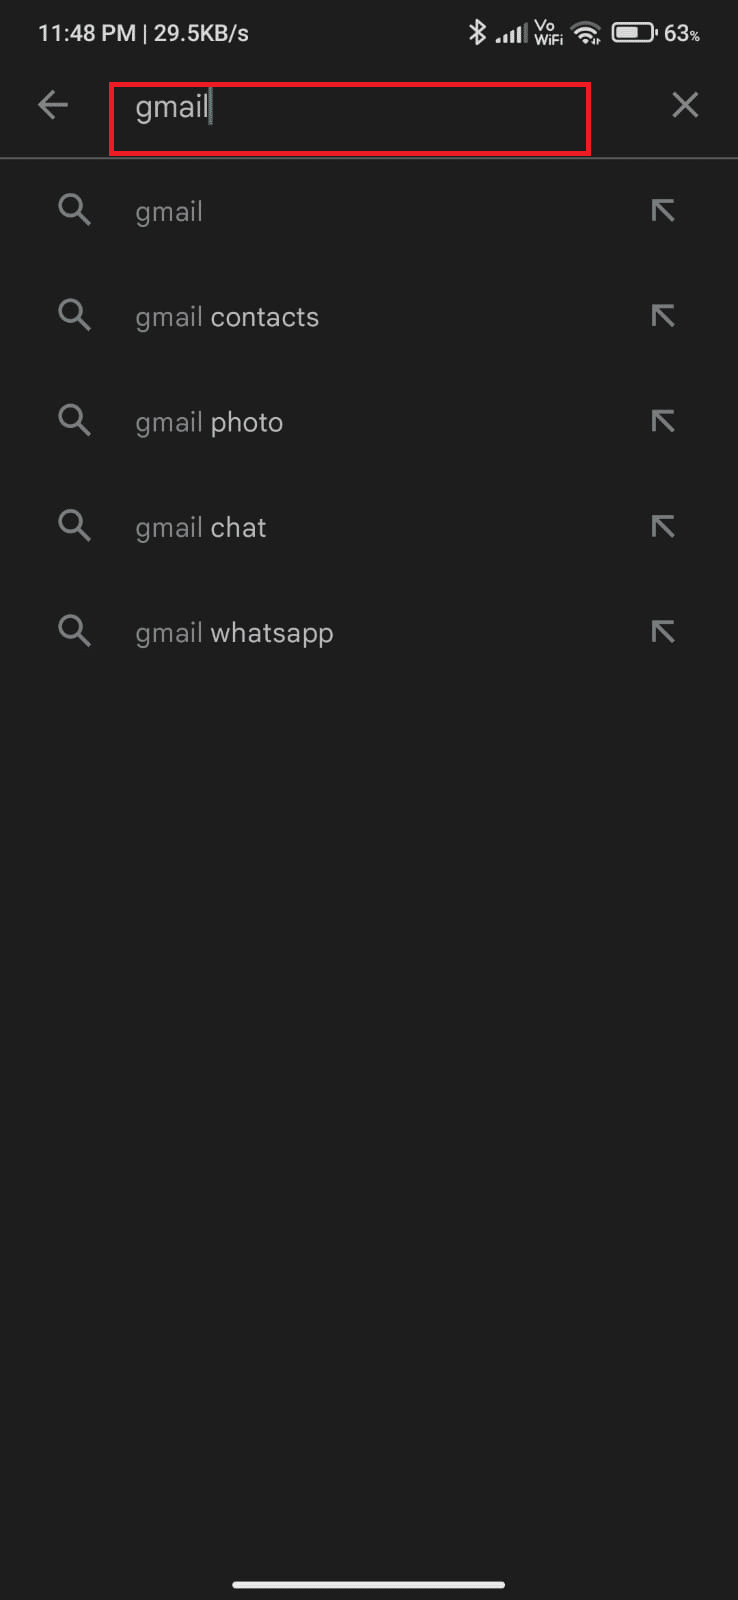 Then, search Gmail 